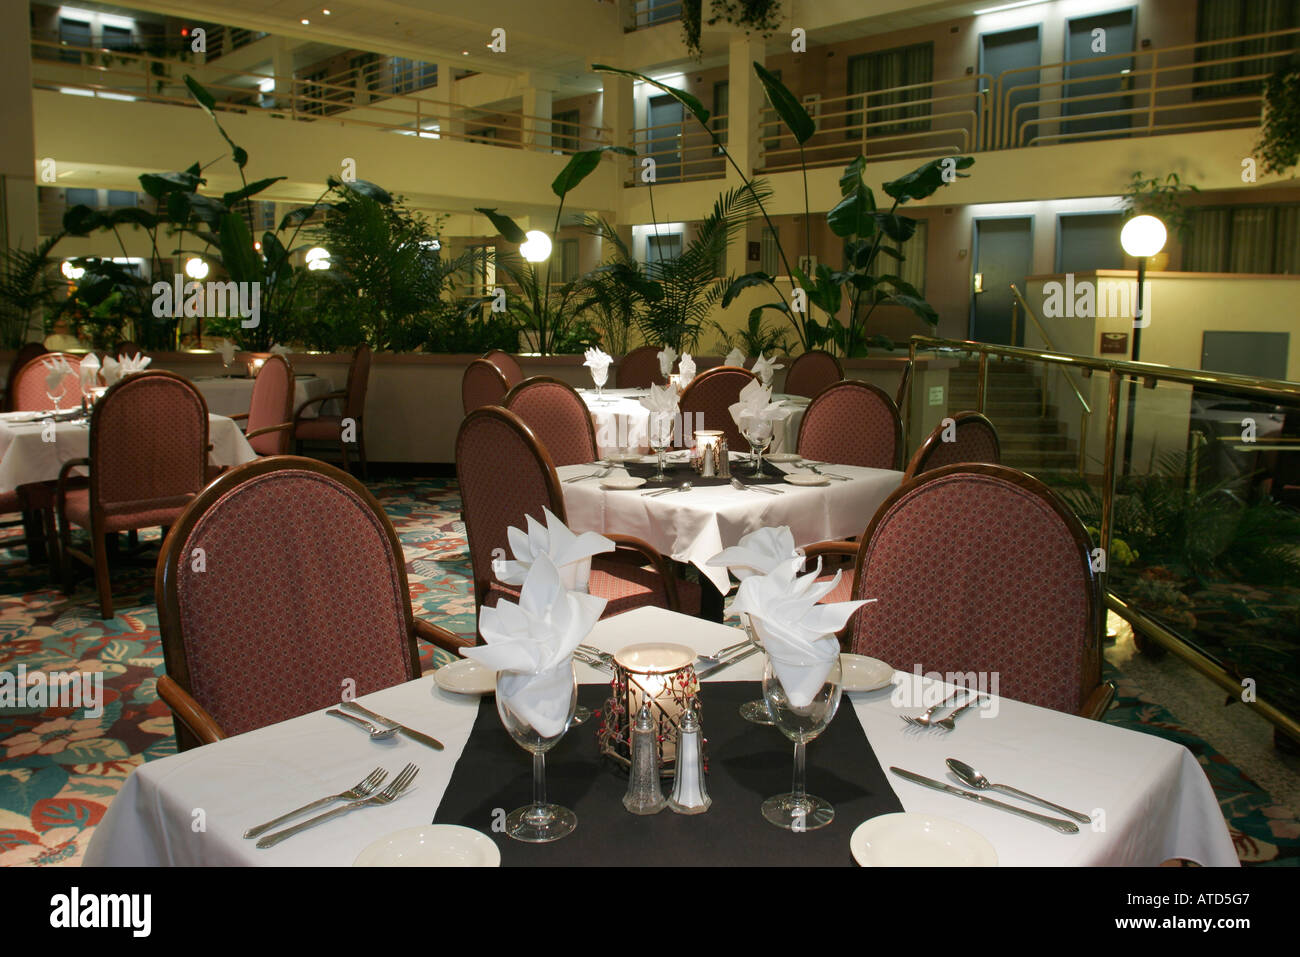 Brookfield Wisconsin,Brookfield Suites Hotel and Convention Center,centre,atrium,Restaurant tables,settings,napkins,visitors travel traveling tour tou Stock Photo